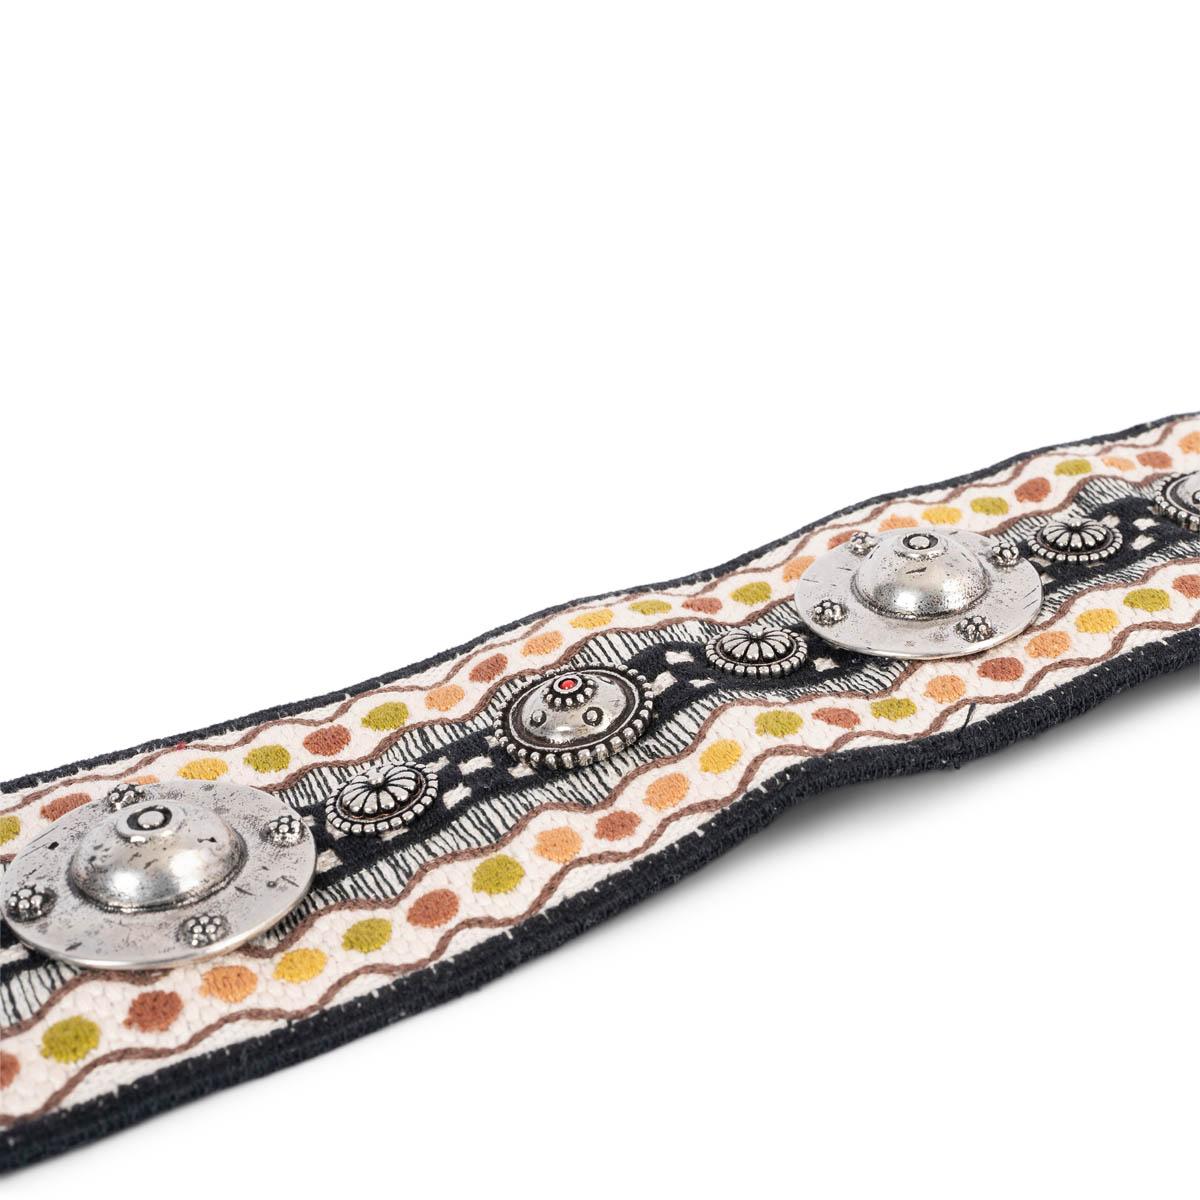 100% authentic Christian Dior Bohemian silver-tone studded metal emblems belt strap in shades of black, white, lime, brown and mustard canvas featuring gold-tone clasps and black leather trimming. Has been carried and is in excellent condition.